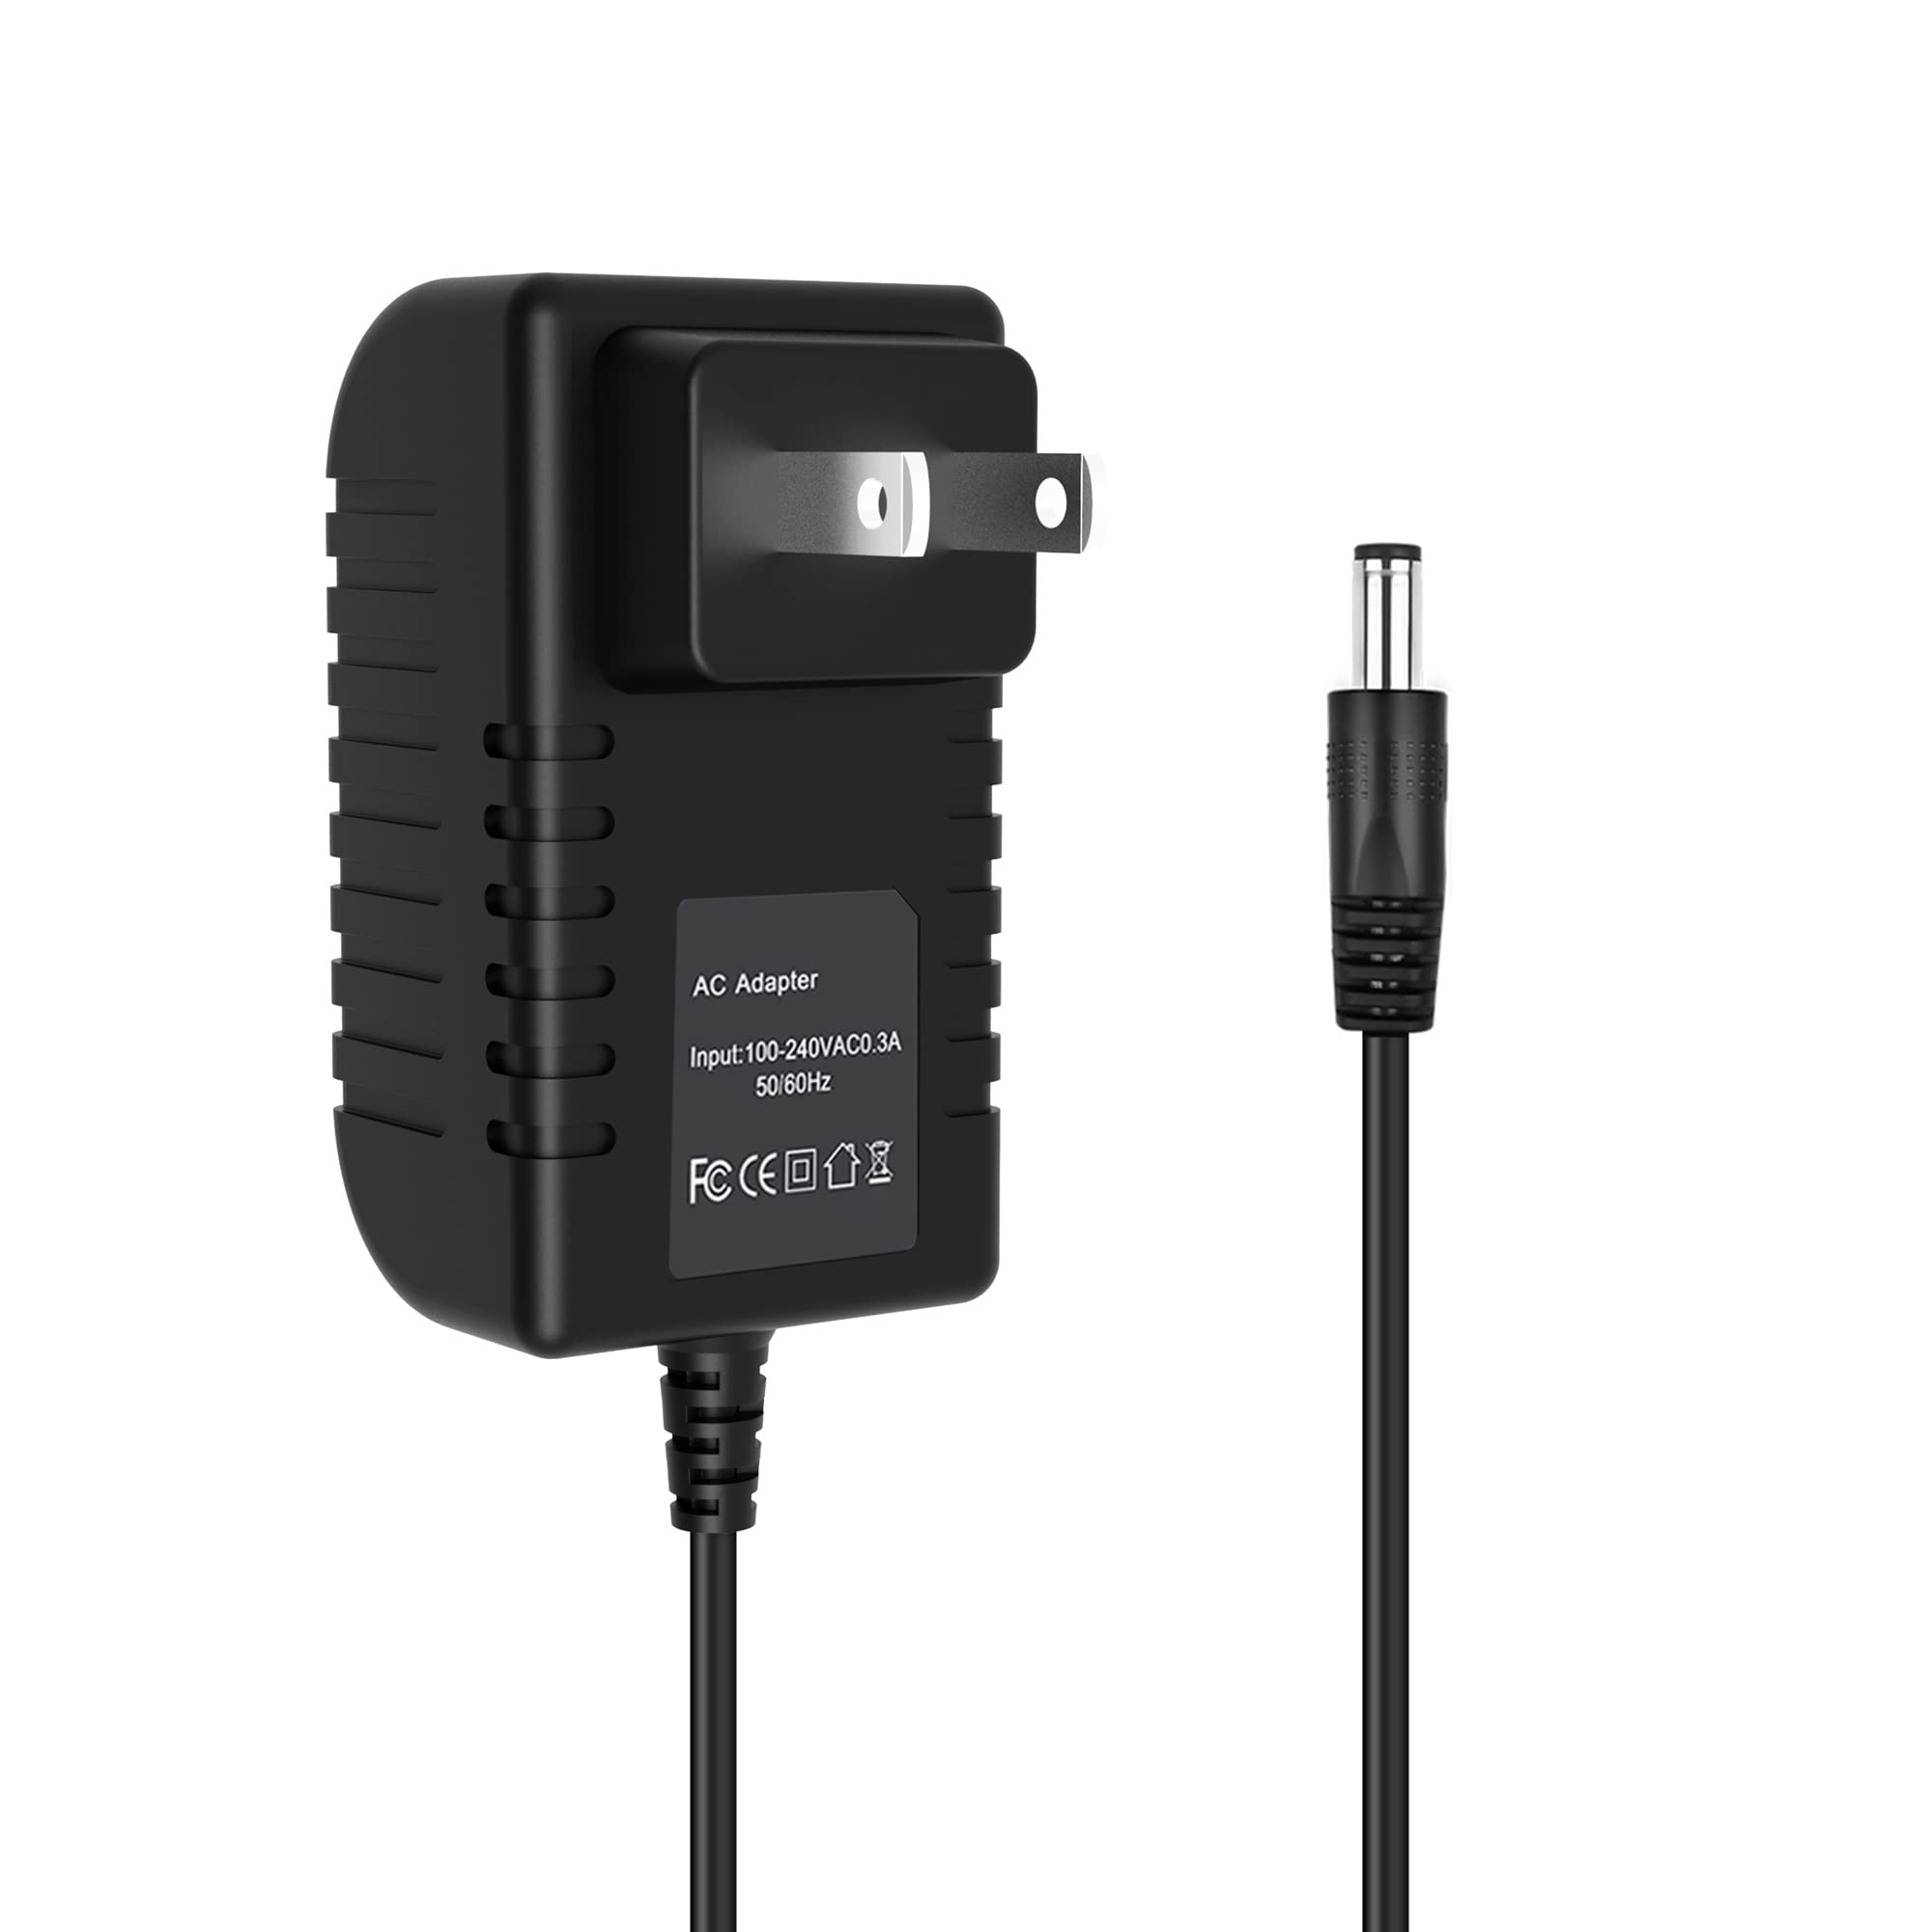 J-ZMQER 12V 2A AC Adapter Wall Charger Power Compatible with Petsafe Wireless Fence PIF-300 Cord PSU